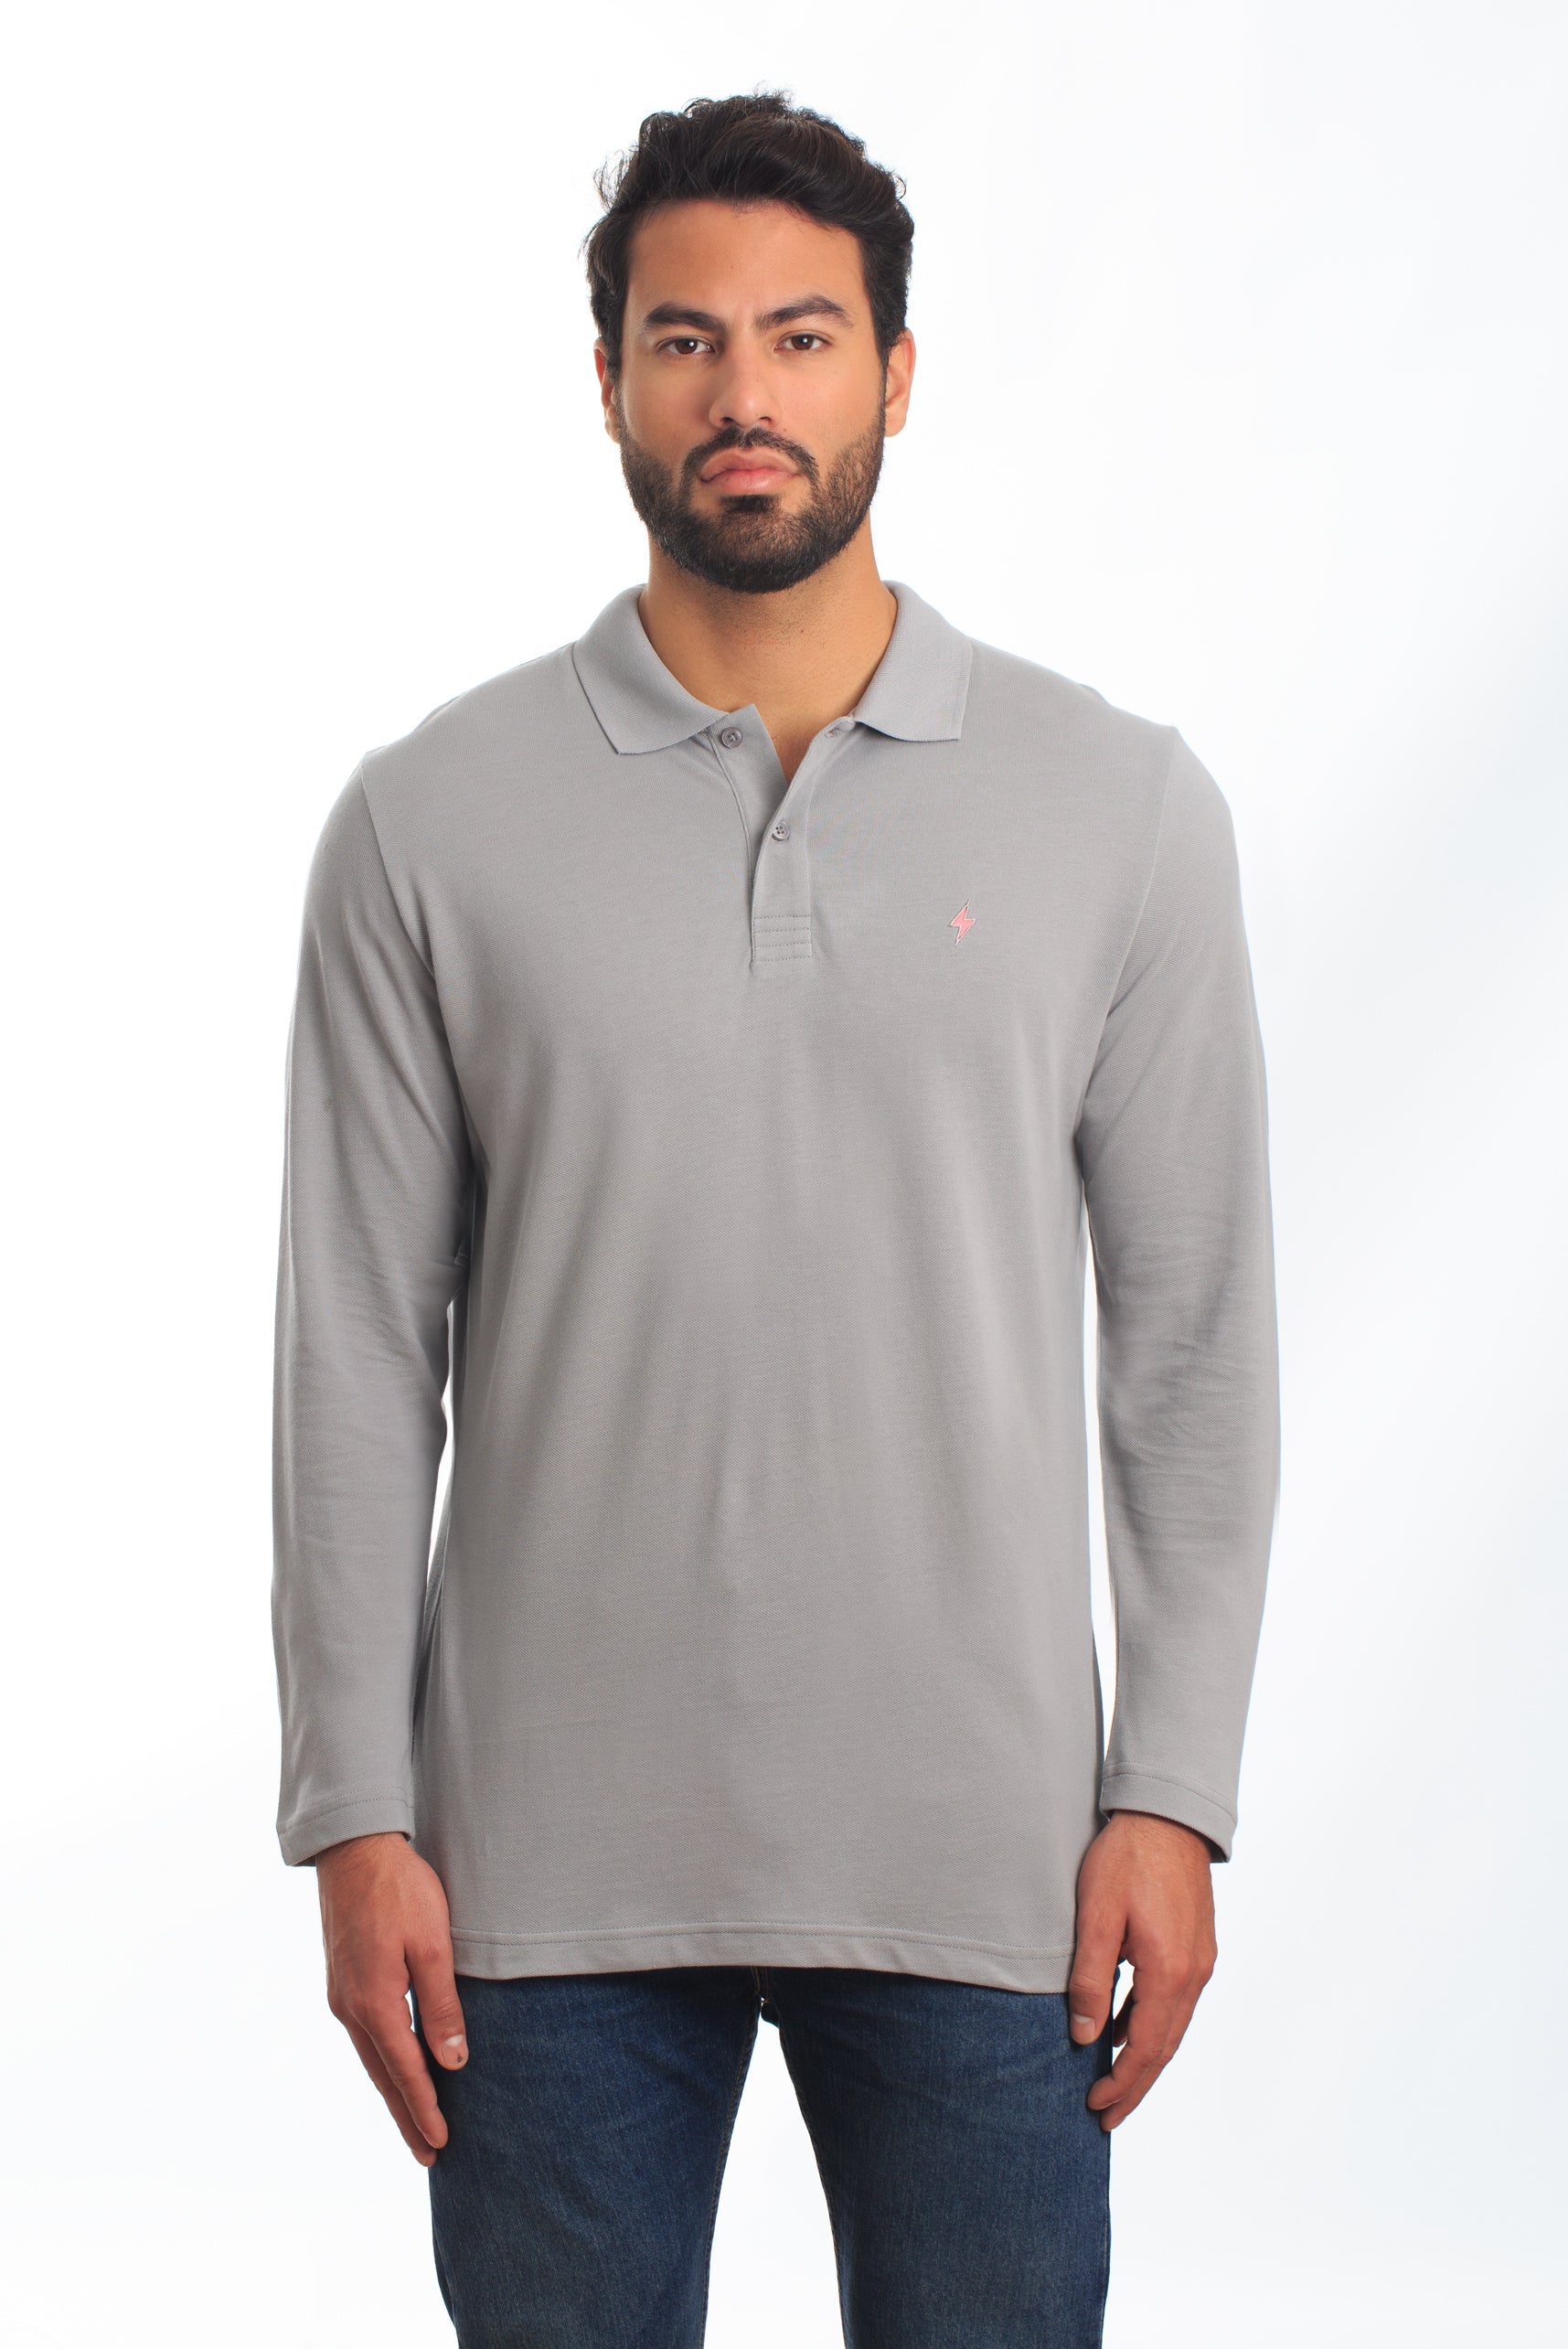 Grey Long Sleeve Polo PL-106 Front